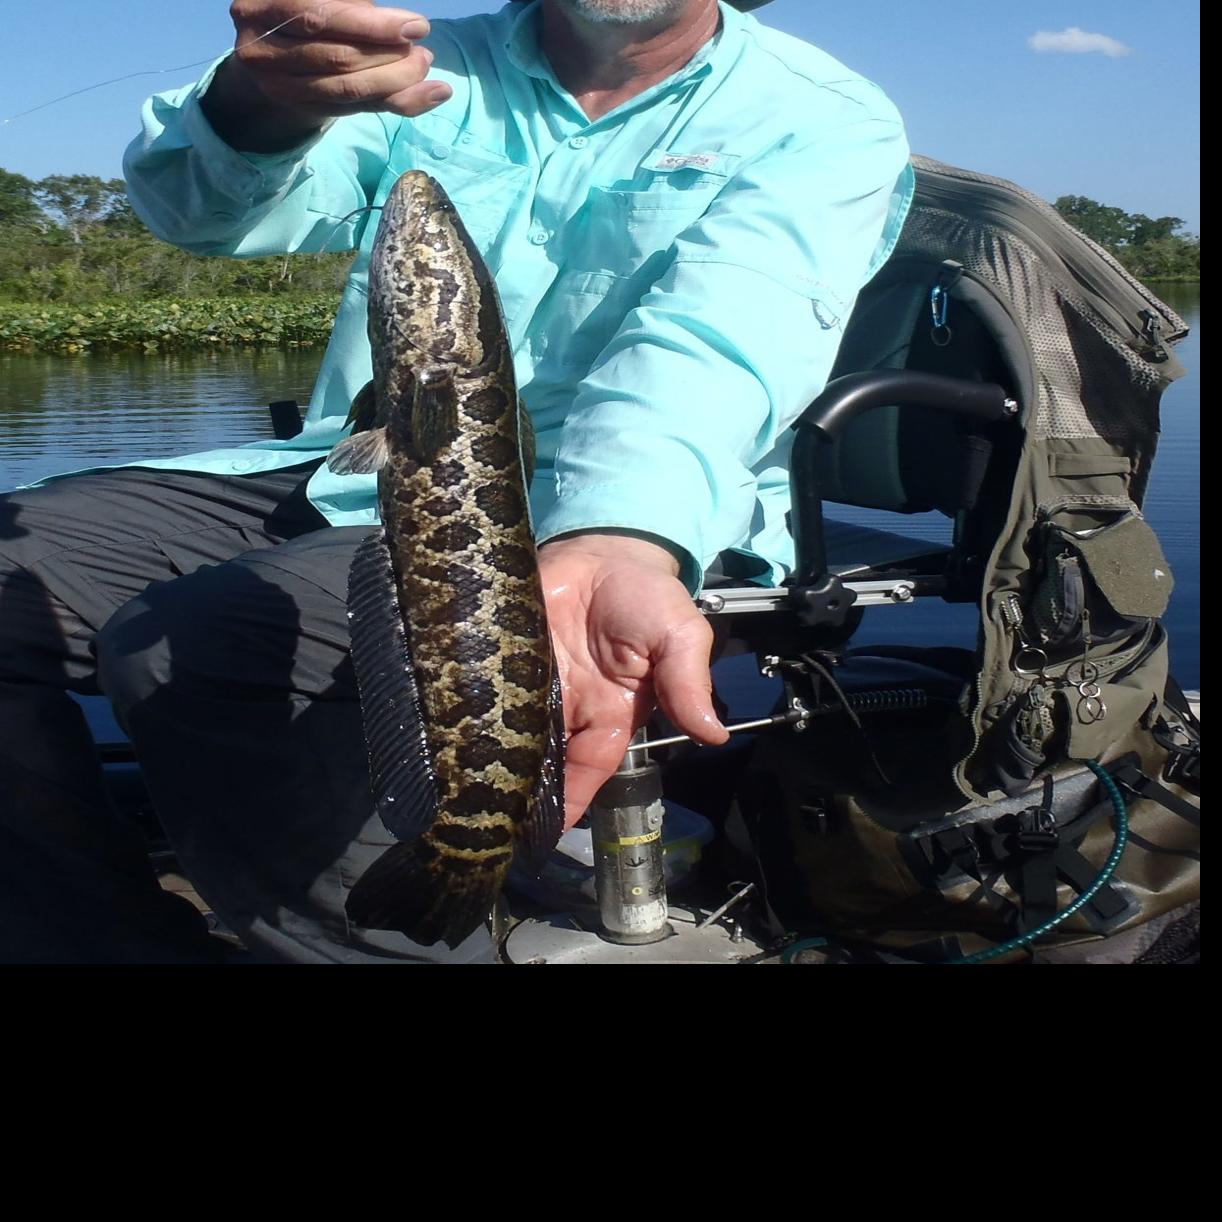 Today's Sportsman: Snakeheads are exactly what anglers desire in a